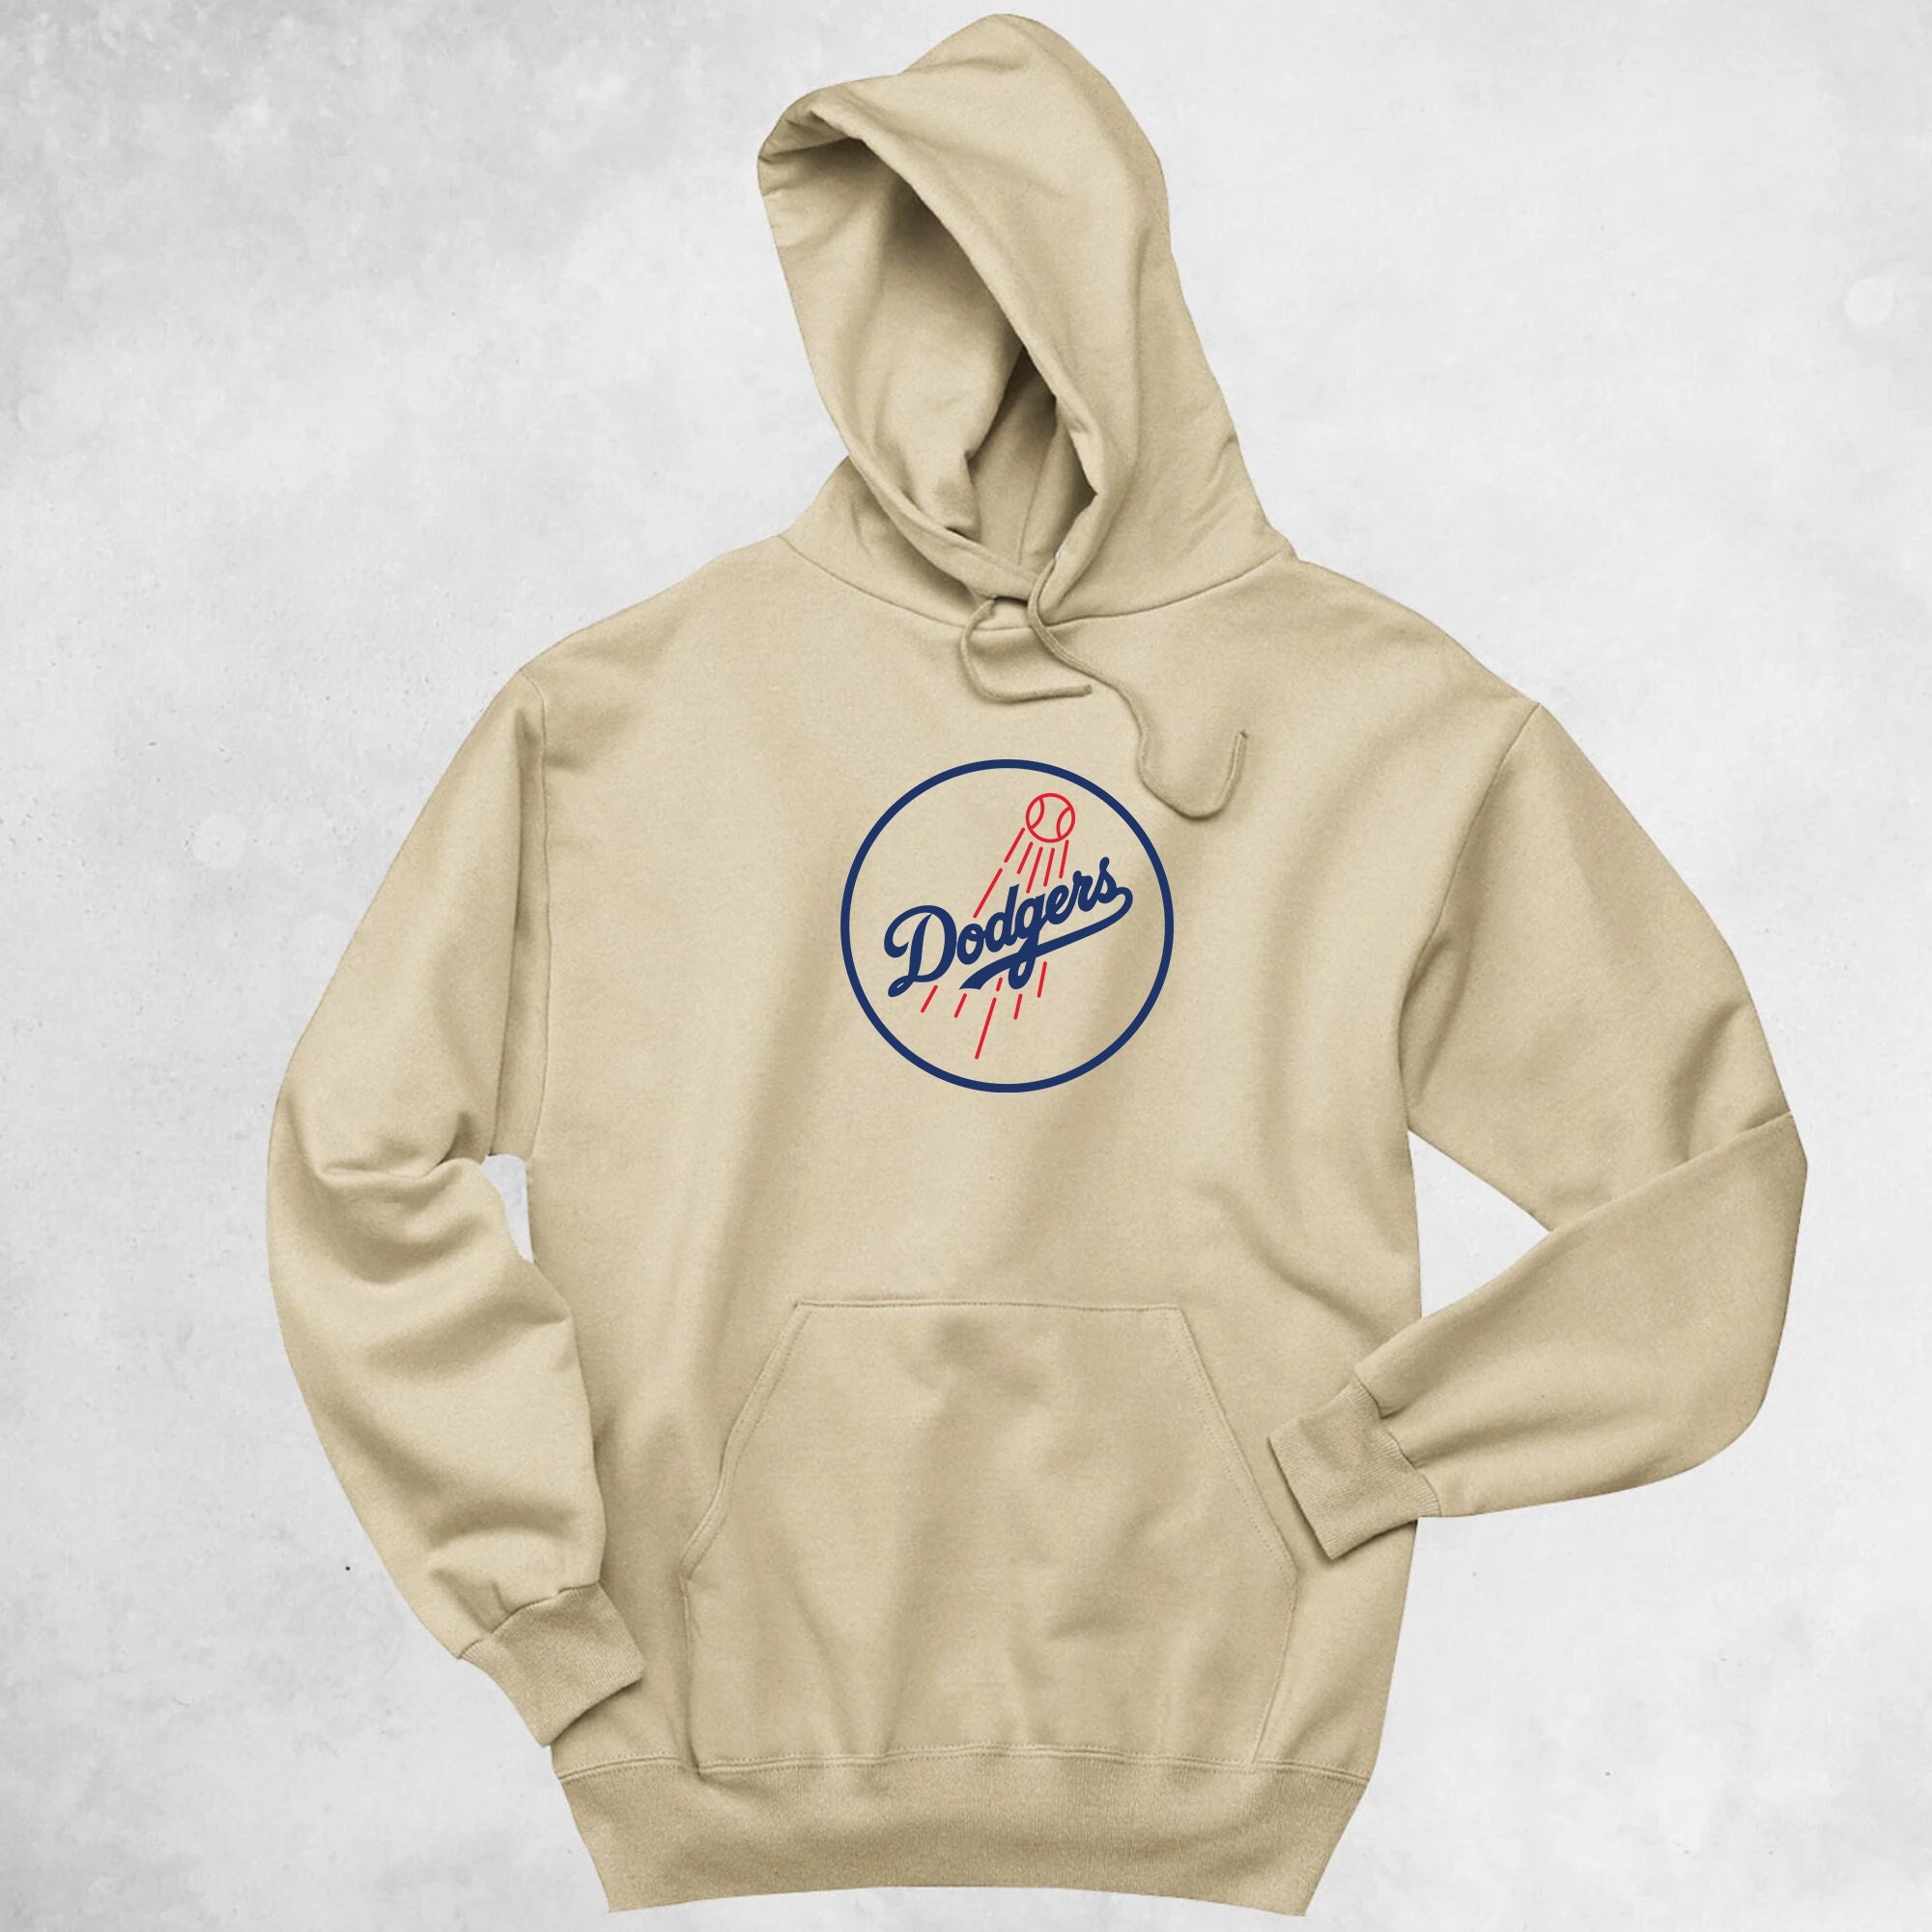 los dodgers sweater